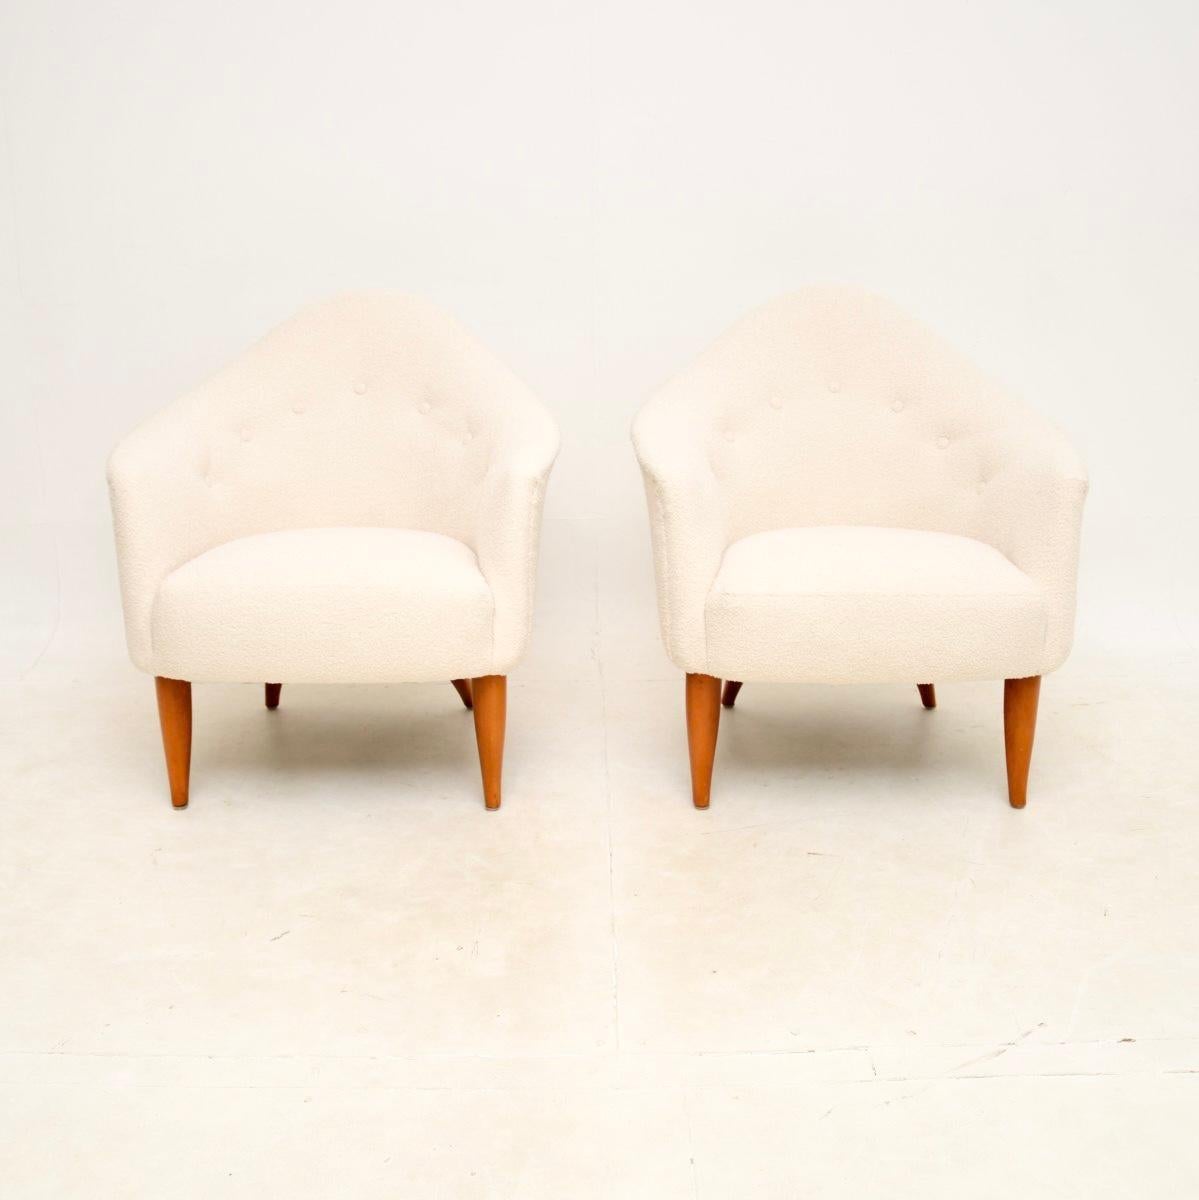 An absolutely stunning pair of vintage Swedish armchairs by Kerstin Horlin Holmquist. This model is called the ‘Lilla Adam’, they were made in Sweden in the 1960’s.

The quality is amazing, they are a lovely size and a very comfortable. They have